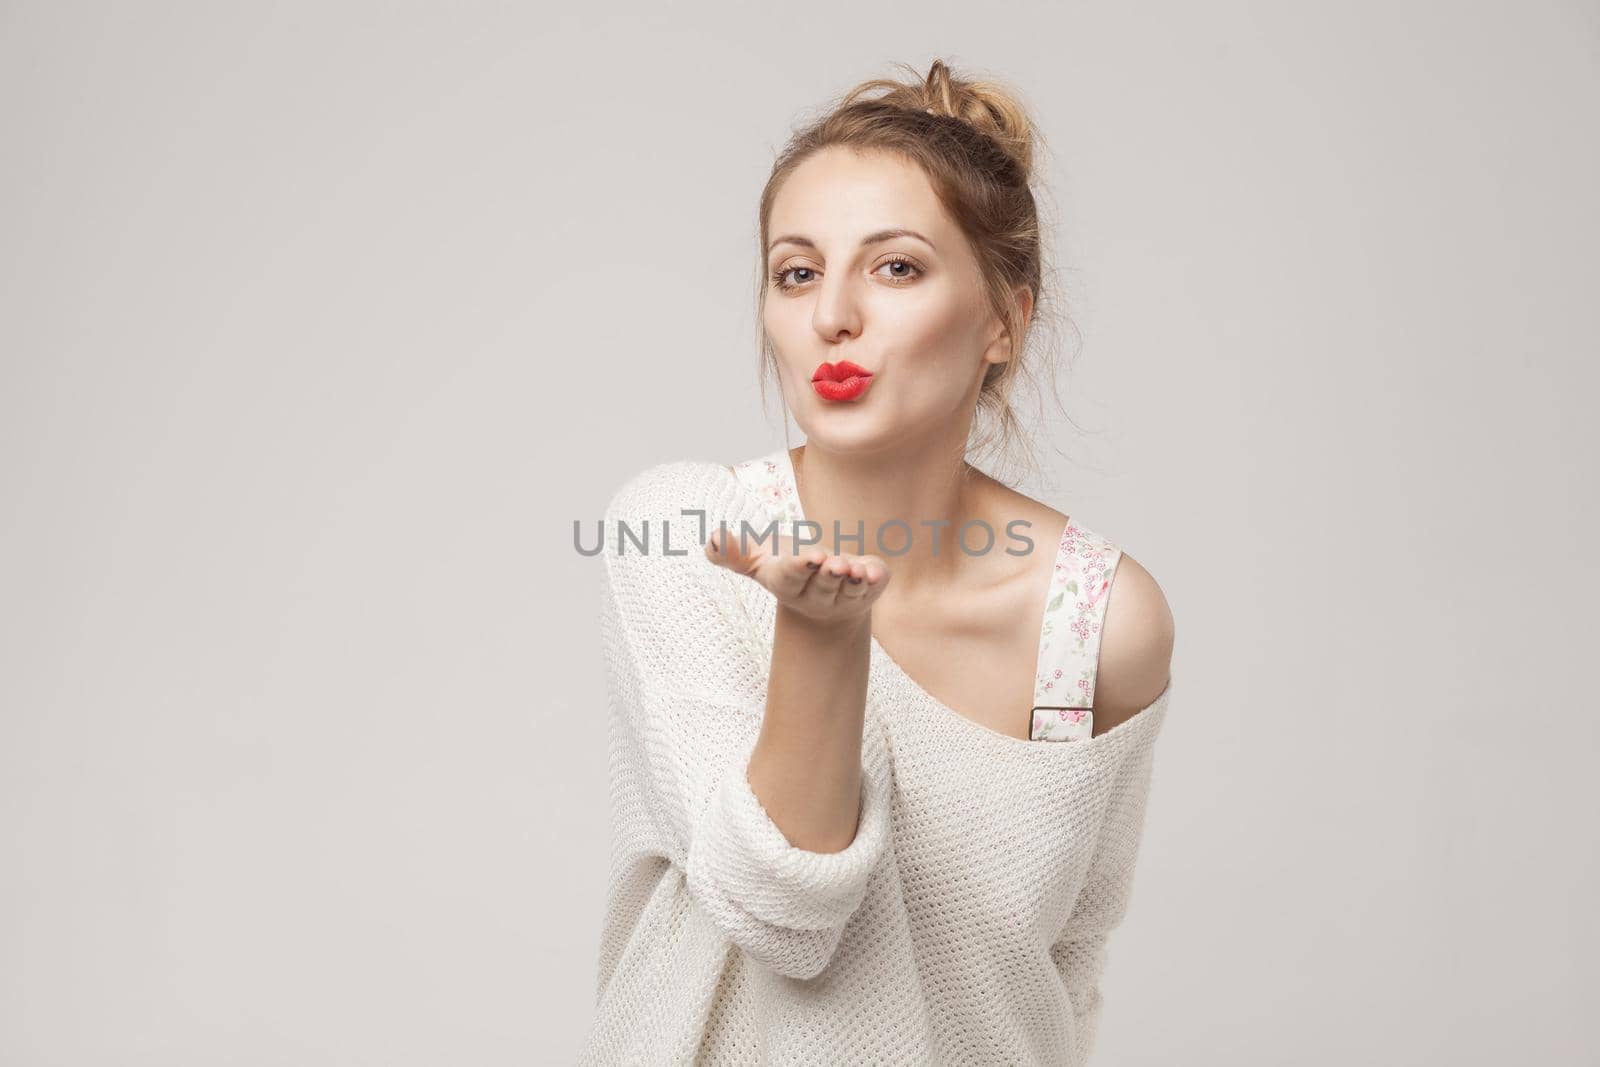 Romantic woman send air kiss at camera. Studio shot, isolated on gray background